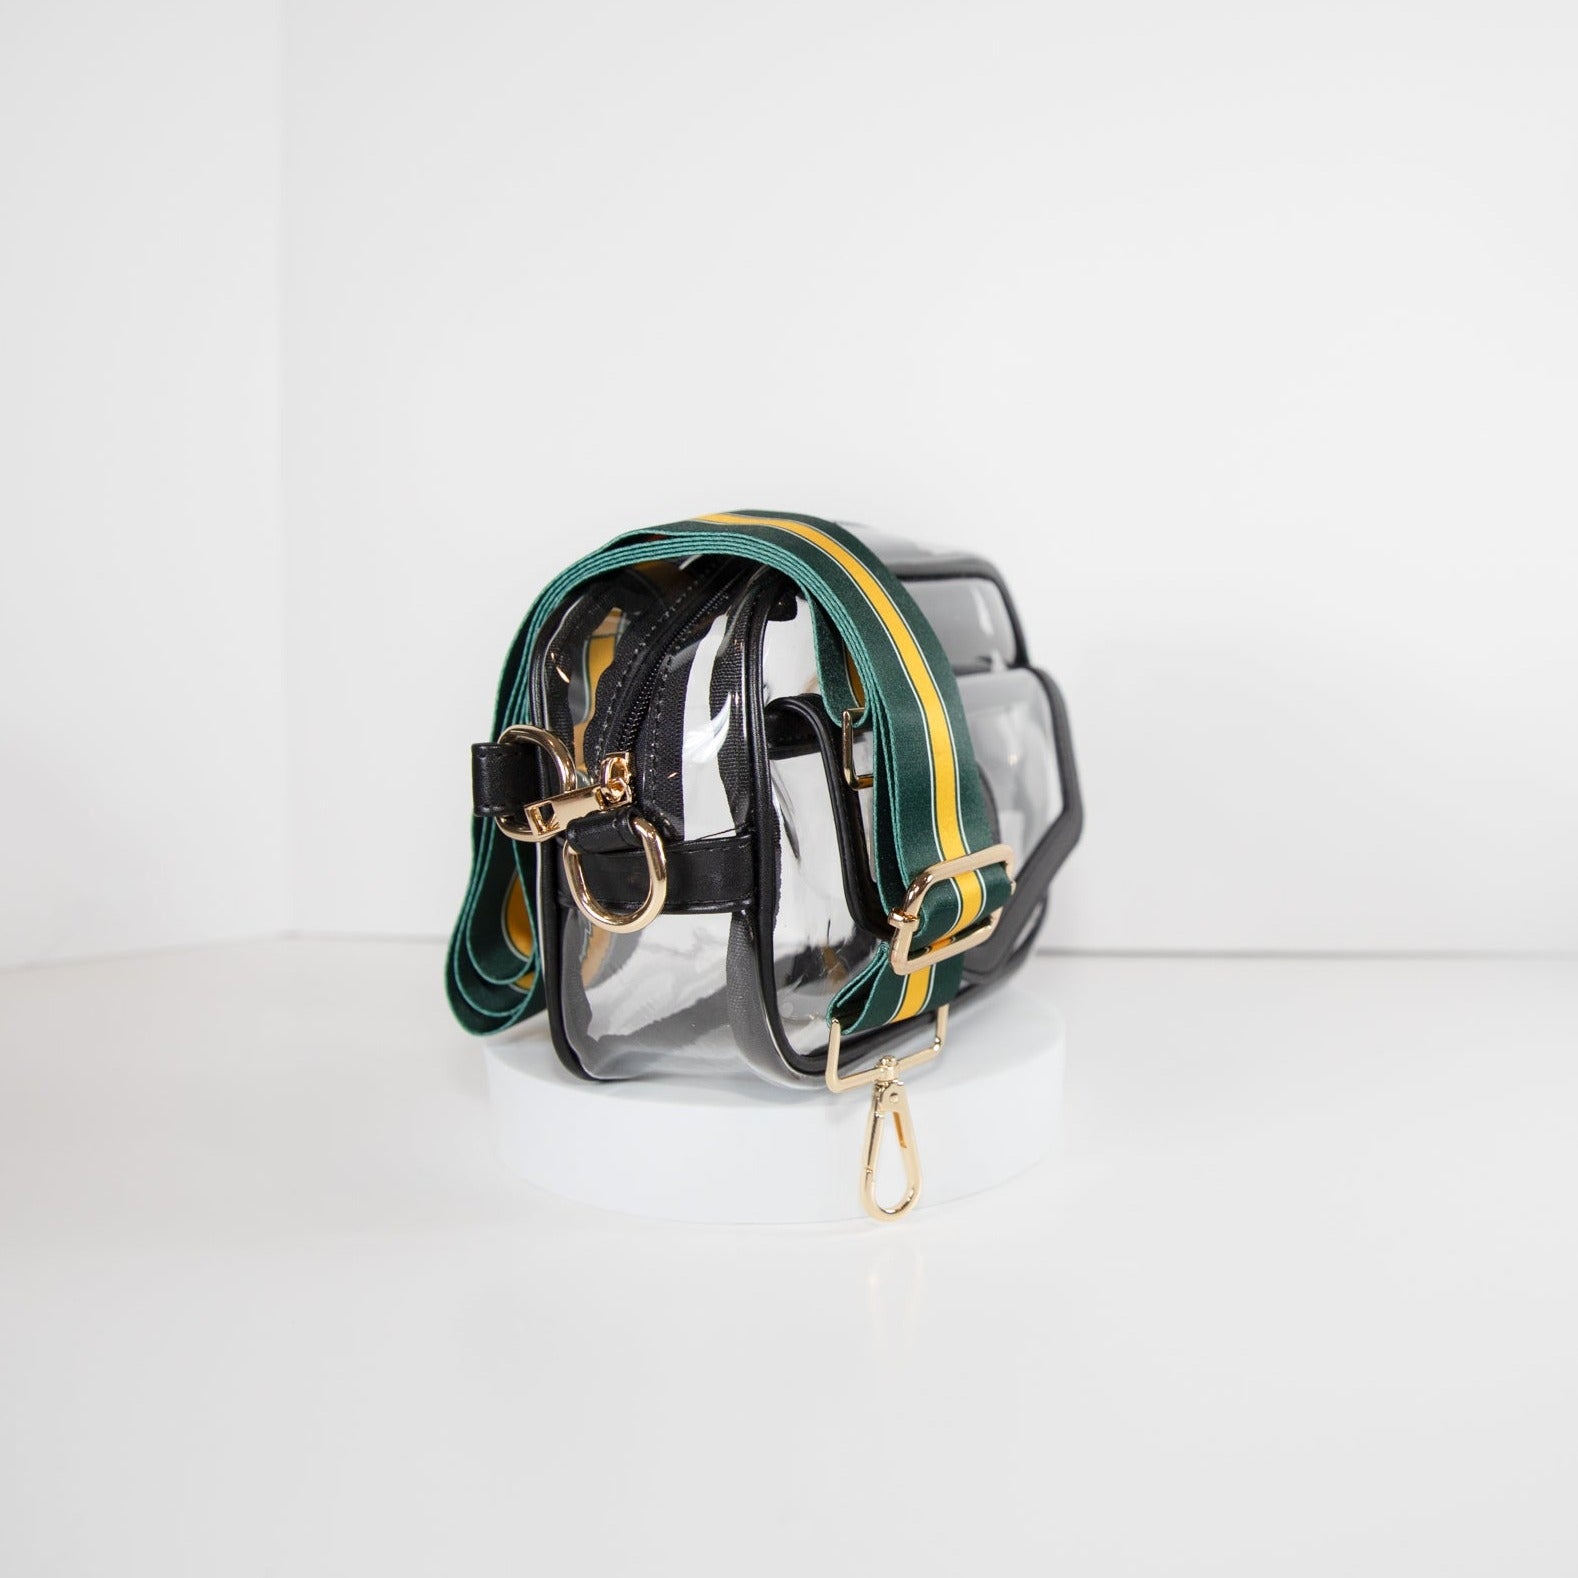 Clear Stadium Bag in black leather trim, side facing, with a strap in the team colors of the Green Bay Packers.